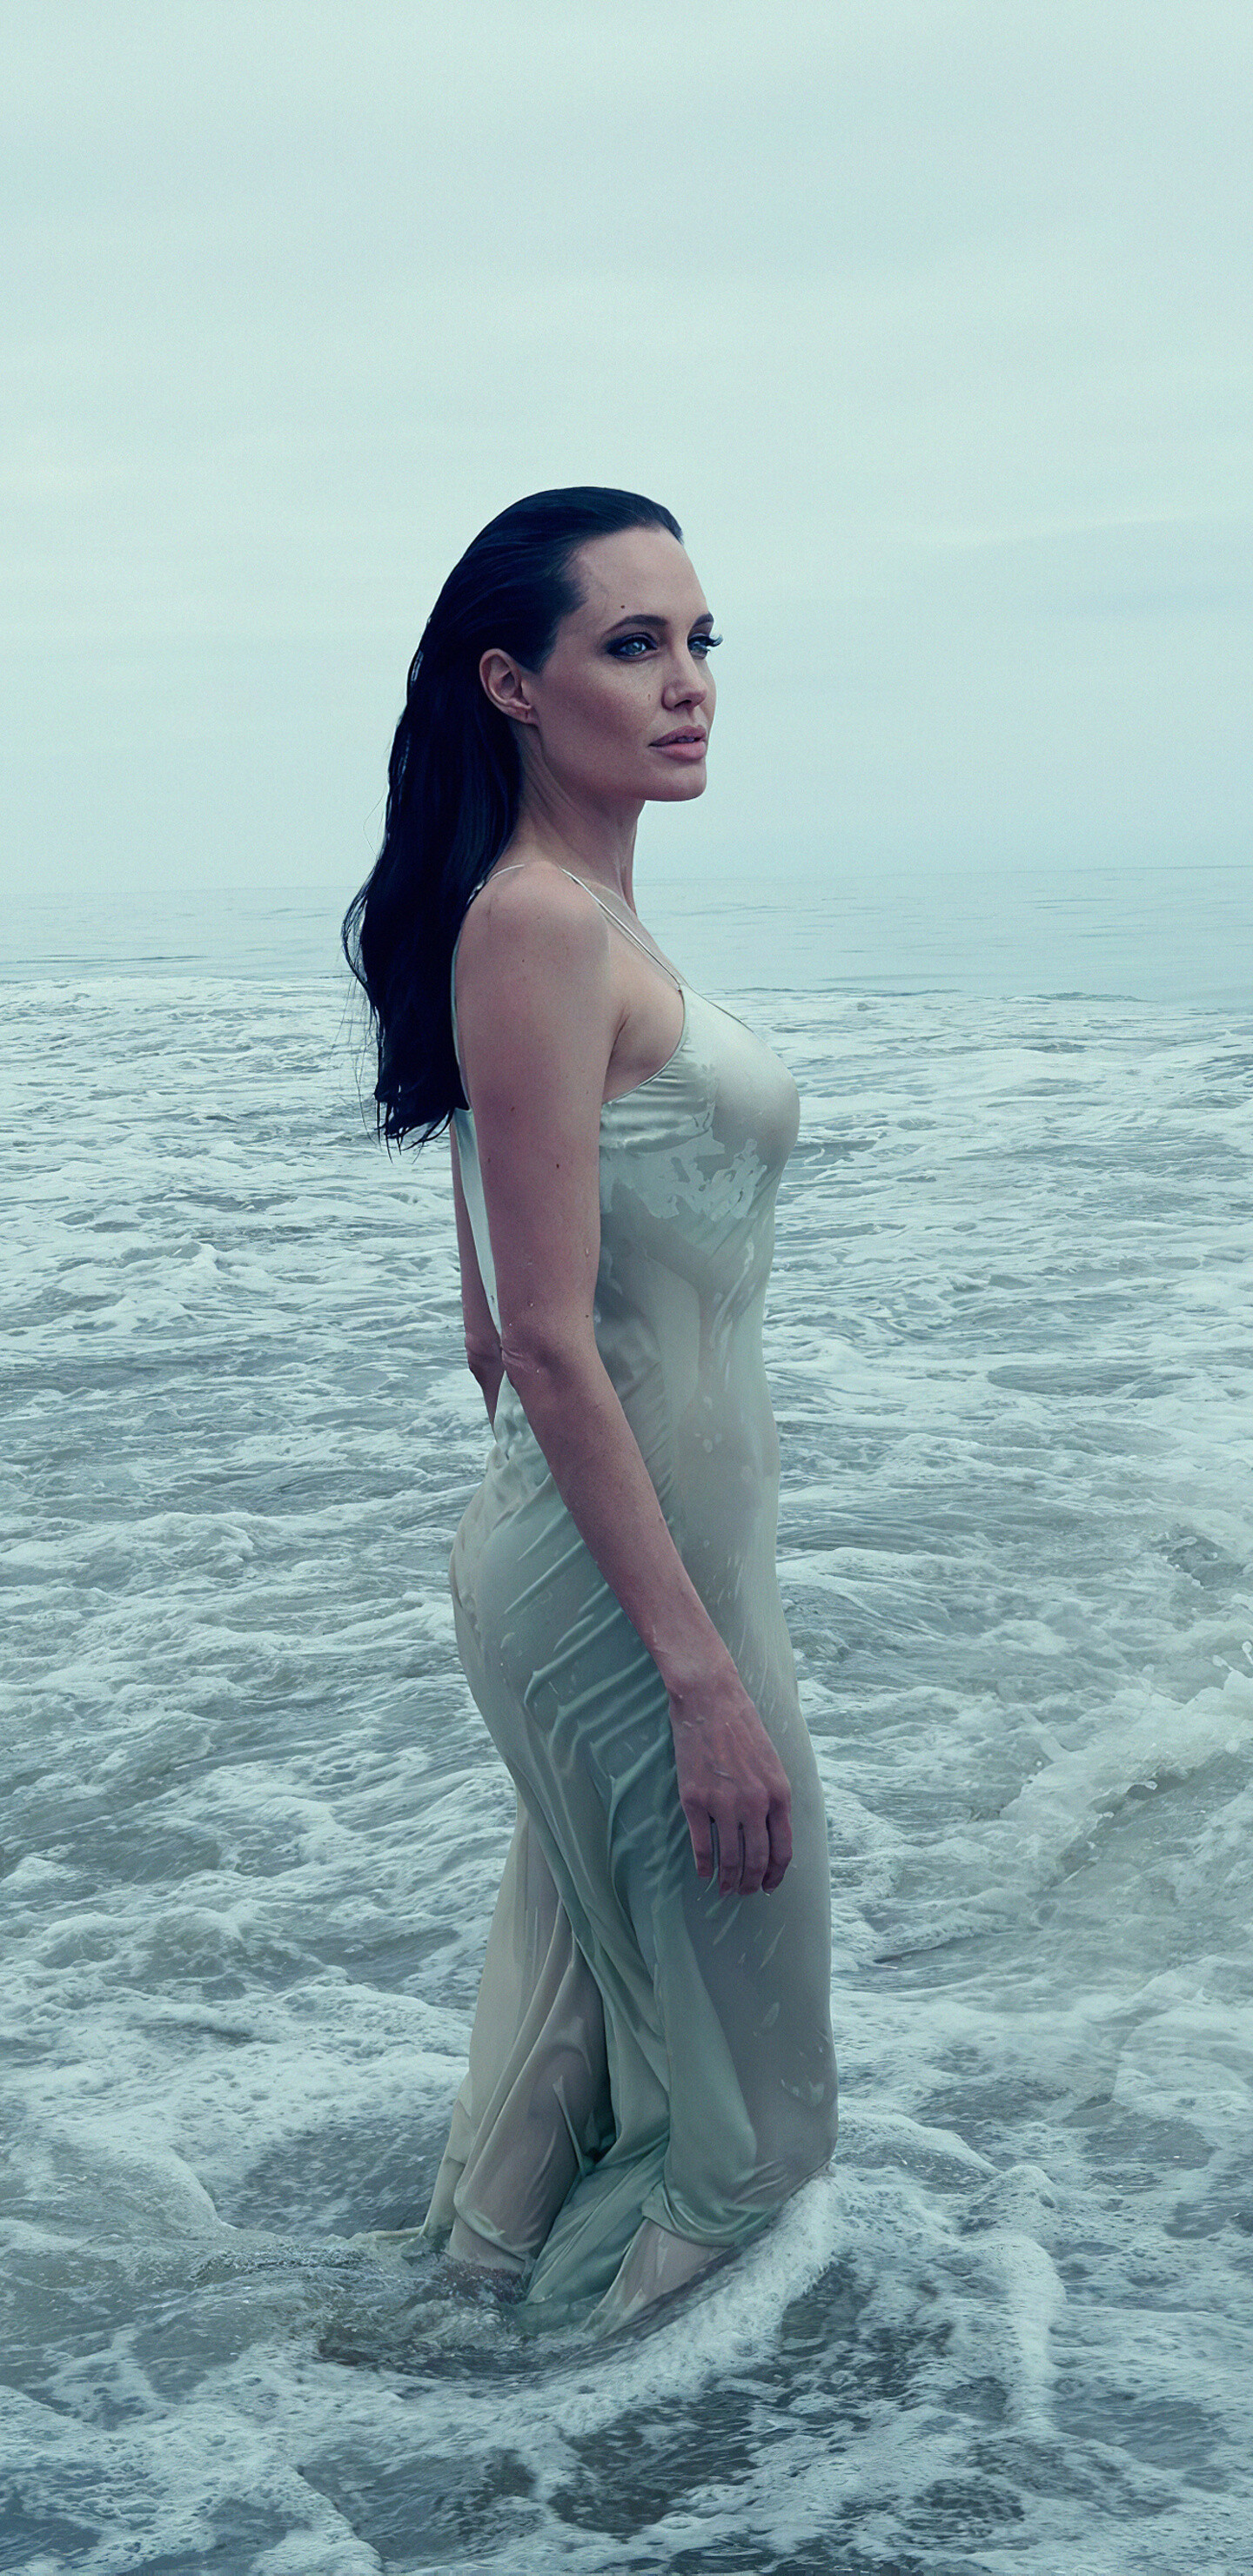 Angelina Jolie: Actress, Cited as the world's most beautiful woman by various media outlets. 1440x2960 HD Wallpaper.